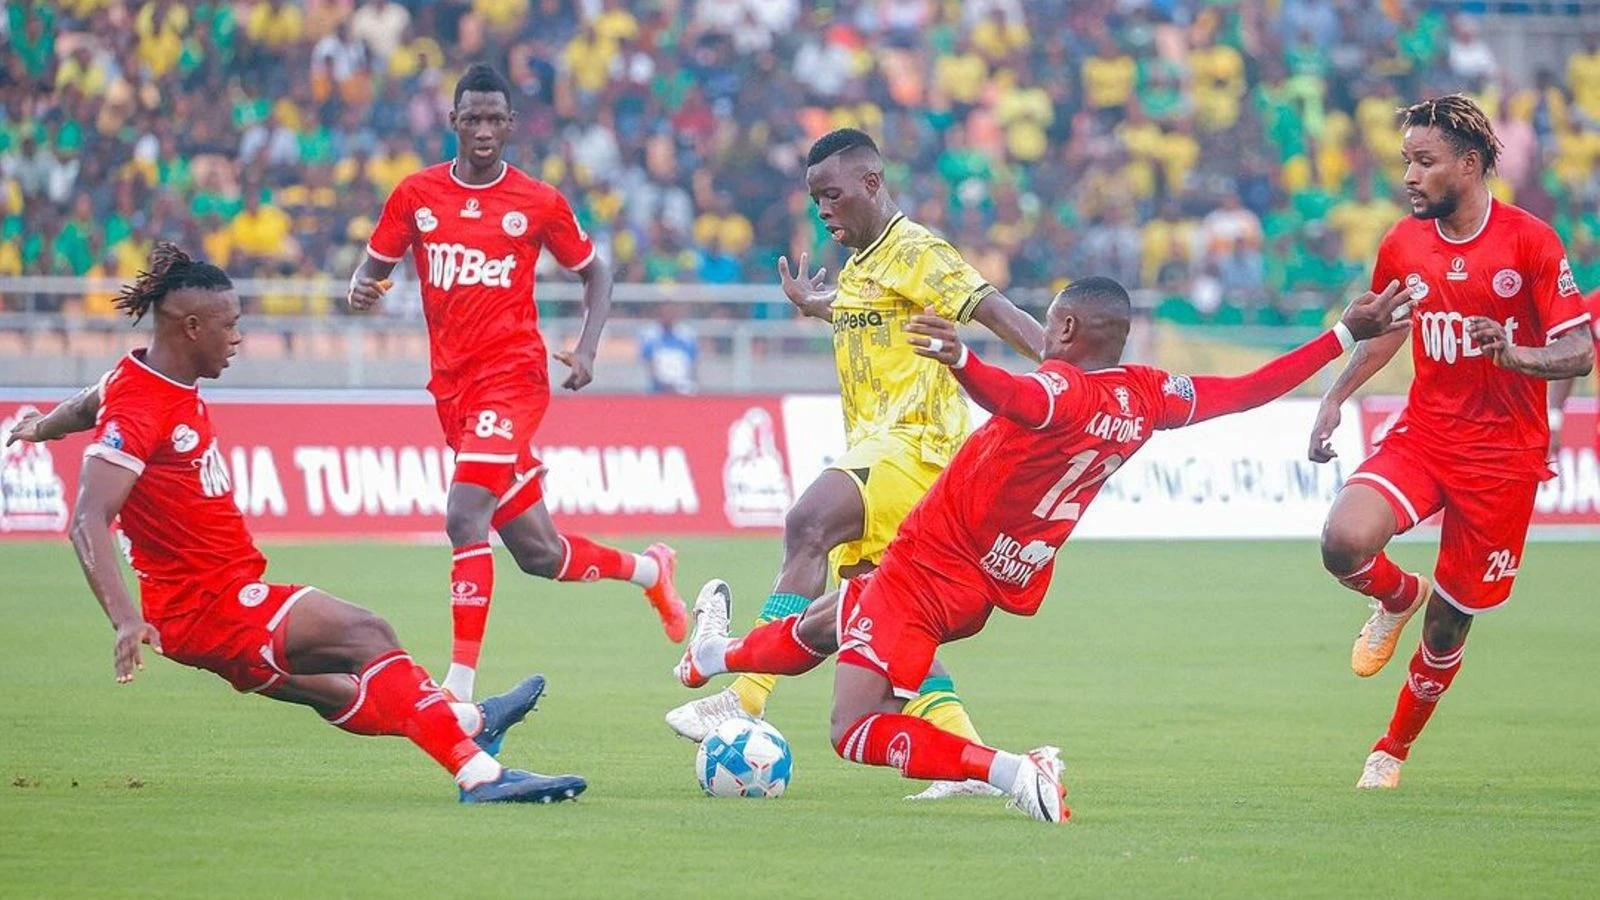 Both Yanga and Simba SC have been kicked out of the CAF Champions League quarterfinals